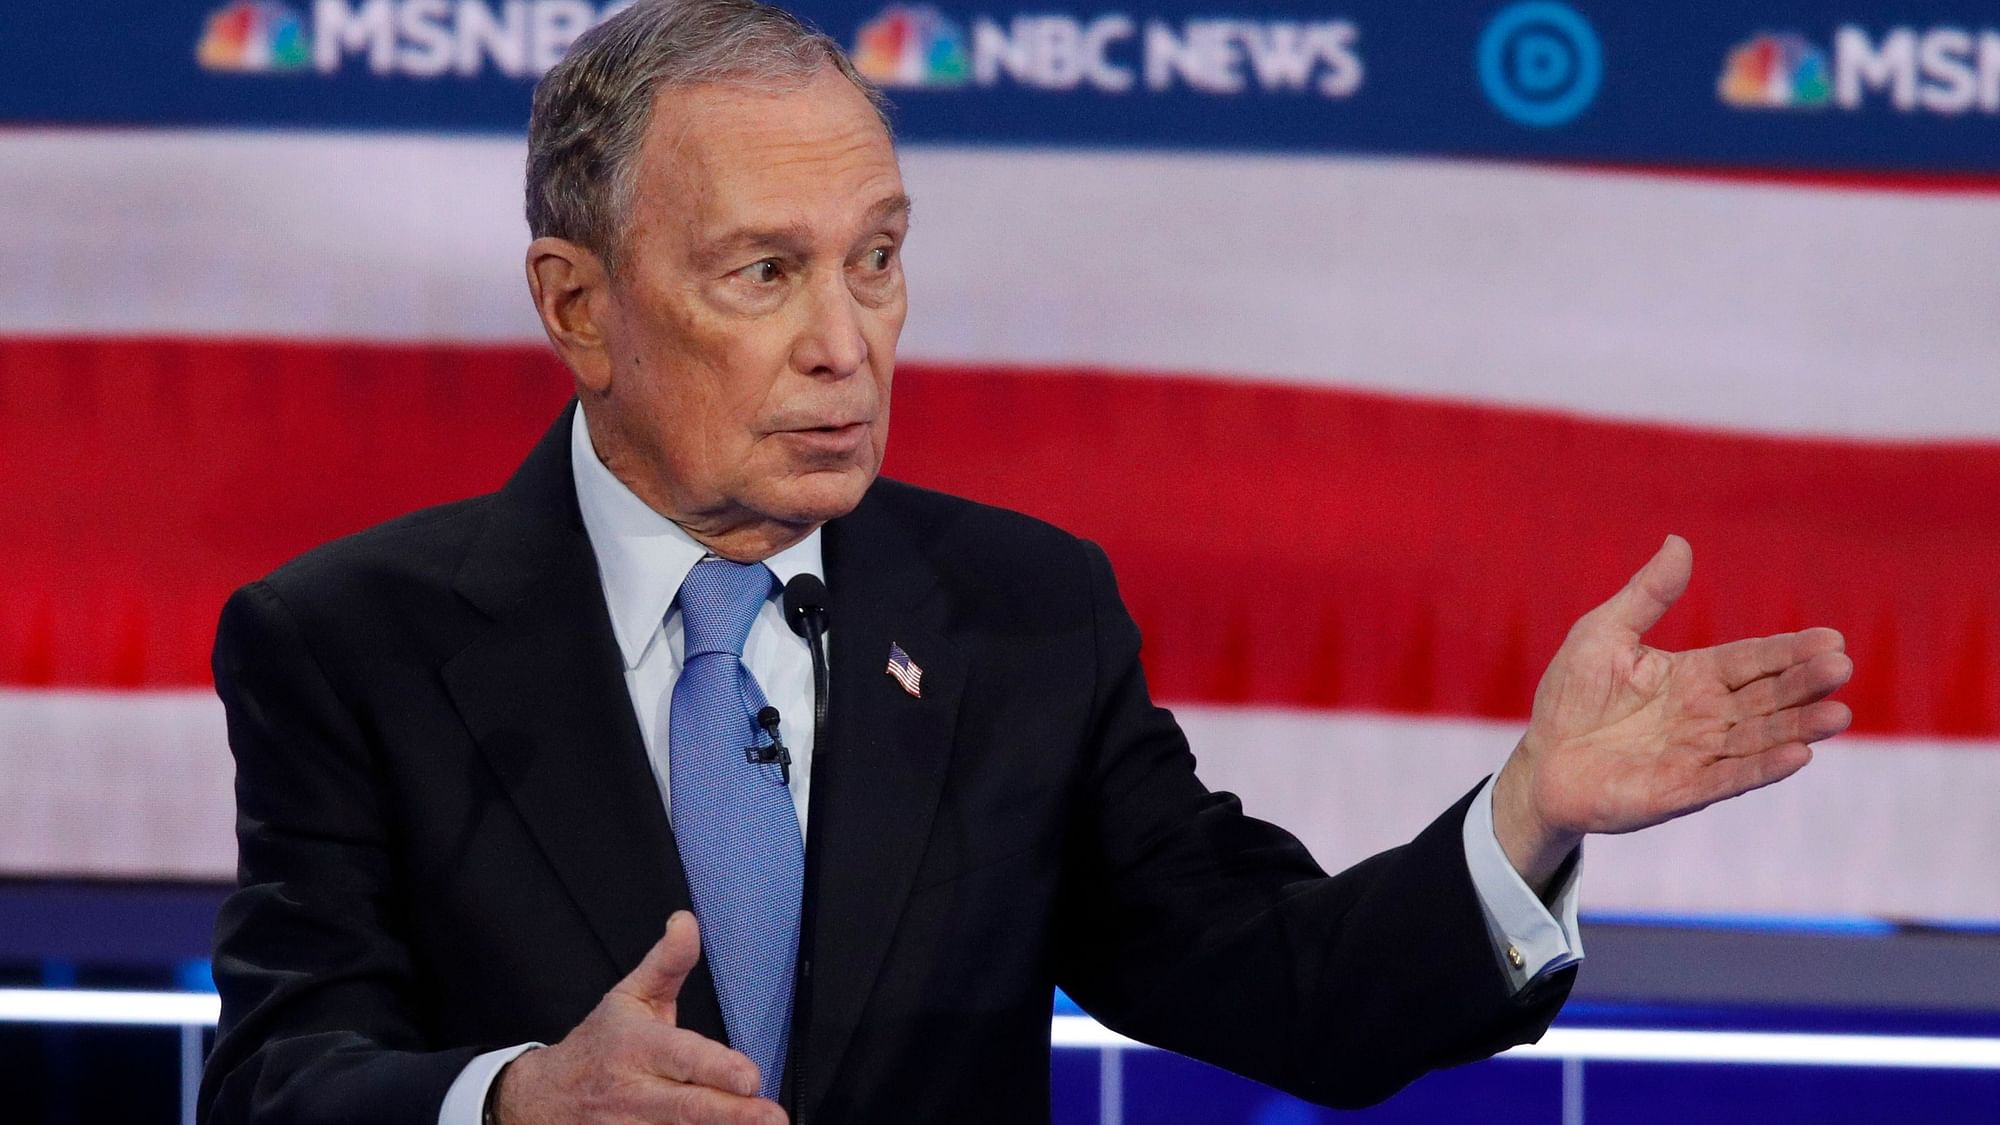 Democratic presidential candidates, former New York City Mayor Michael Bloomberg speaks during a Democratic presidential primary debate on Wednesday,19 February.